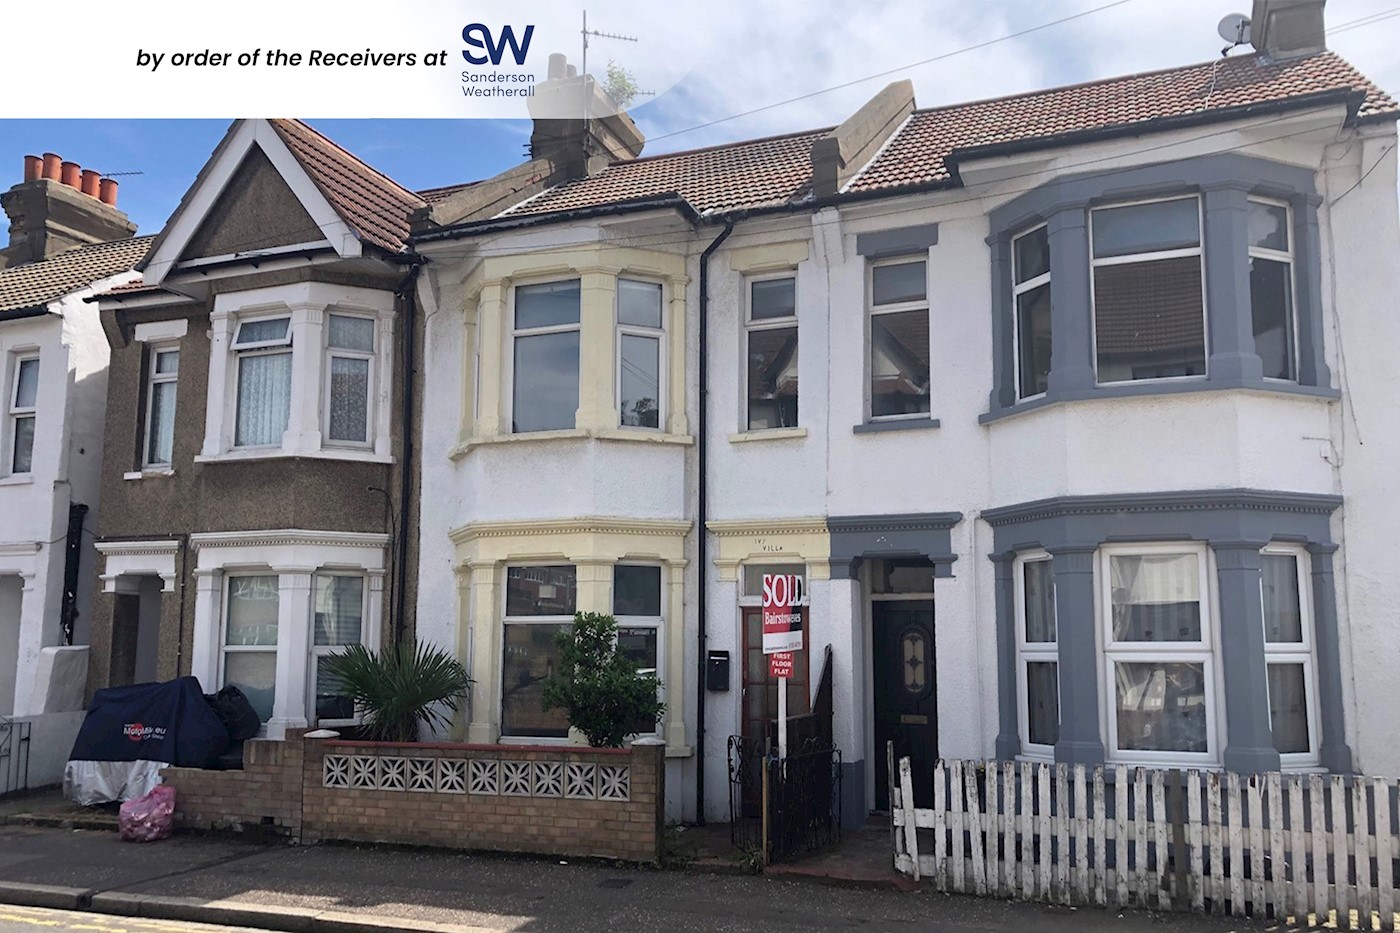 Ivy Villa, Beresford Road, Southend on Sea, SS1 2TW 1/7